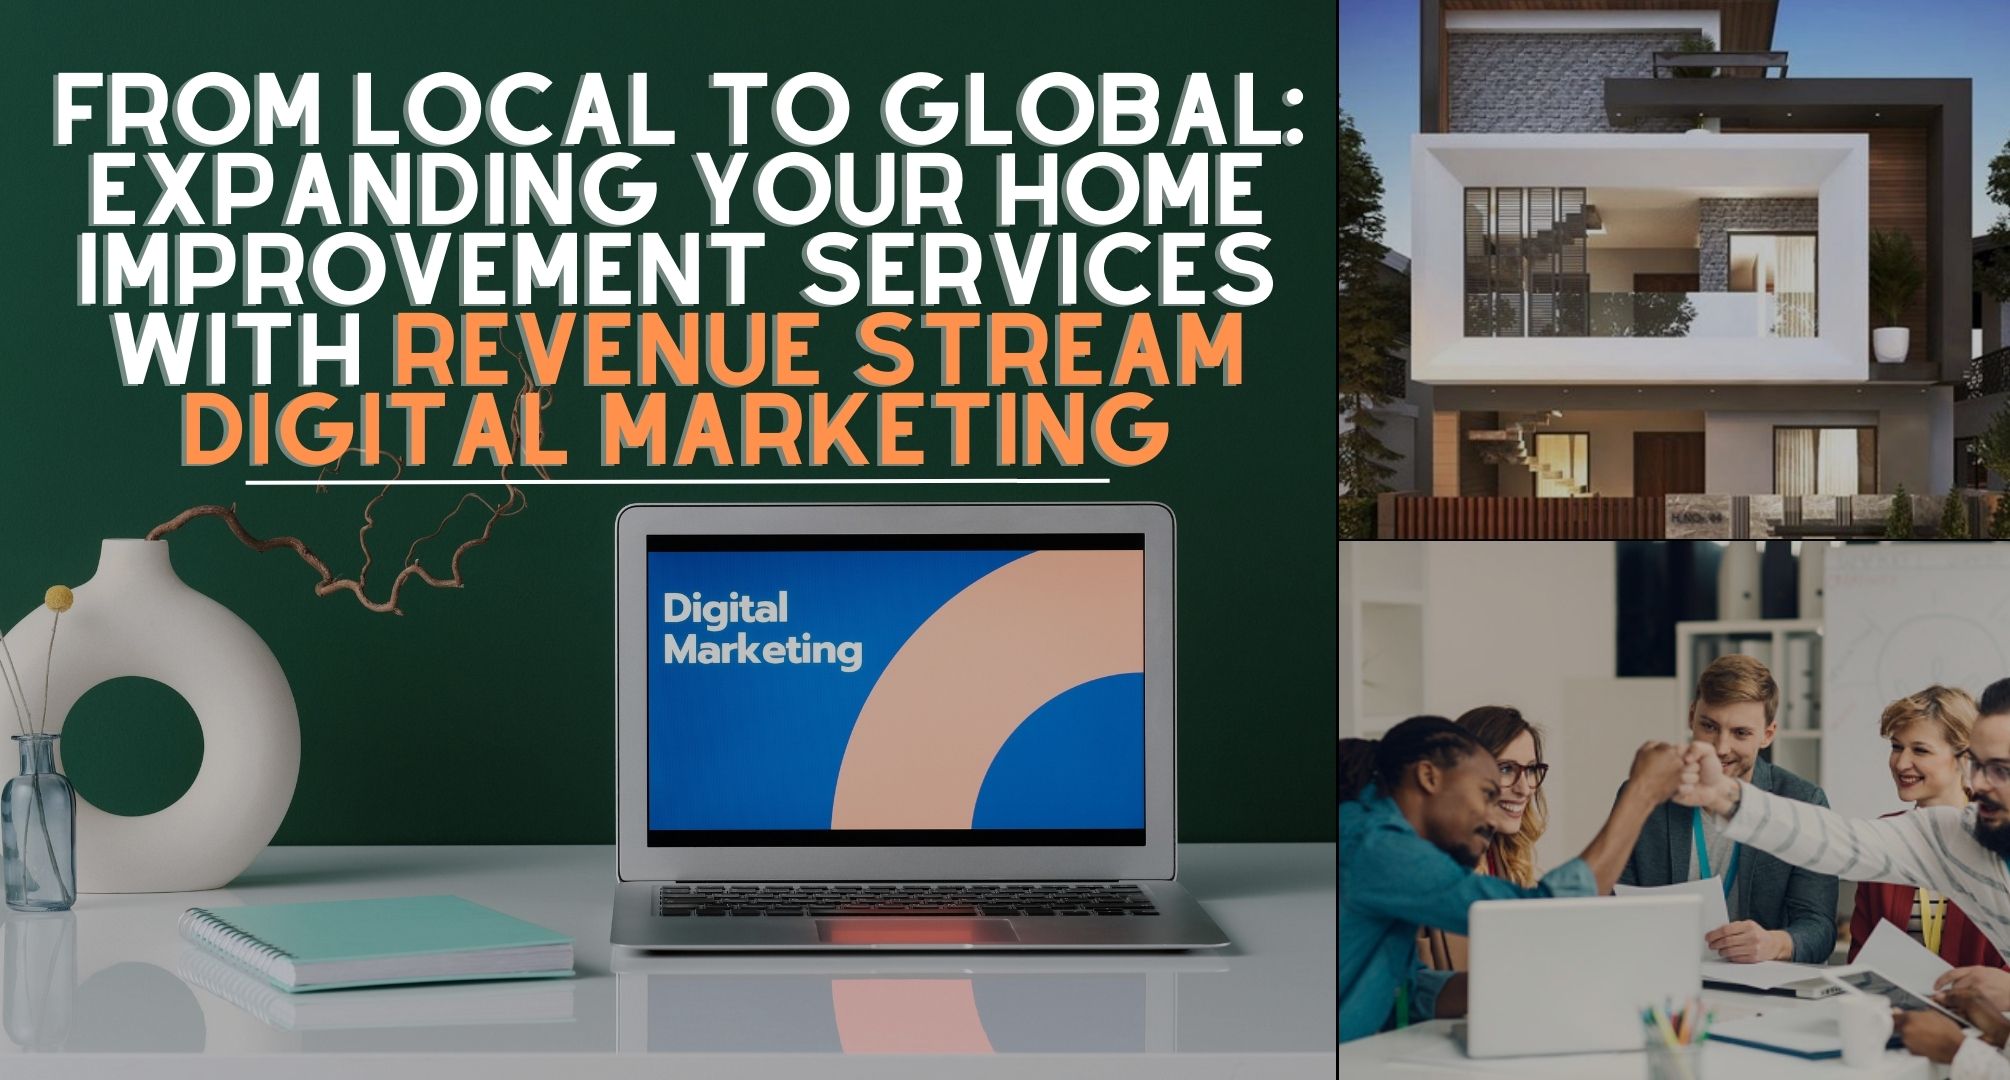 From Local to Global: Expanding Your Home Improvement Services with Revenue Stream Digital Marketing